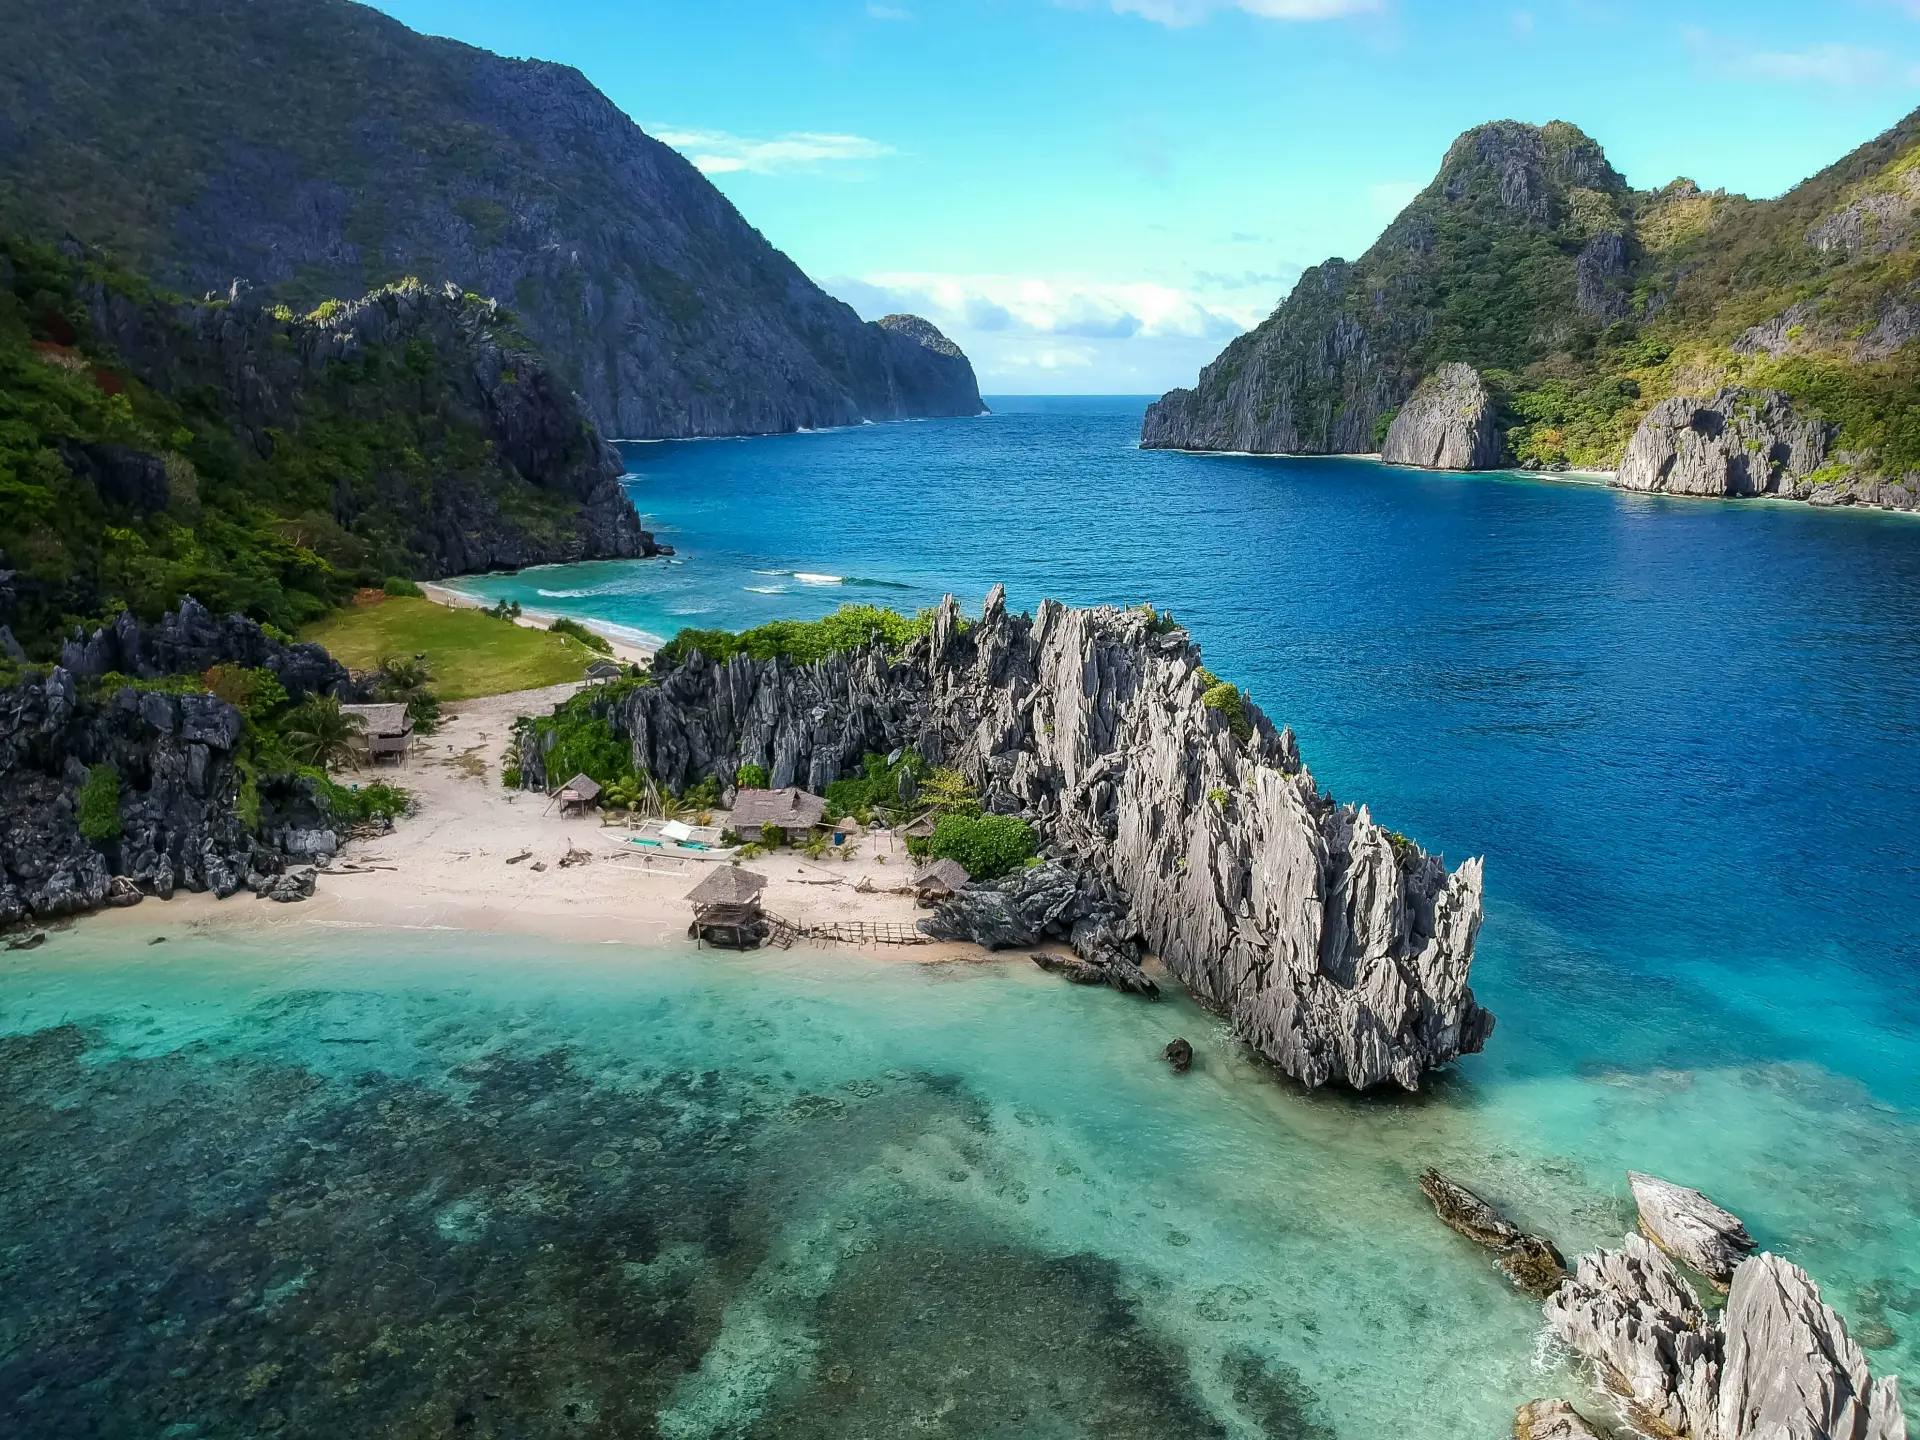 An aerial view of a beach in the philippines.